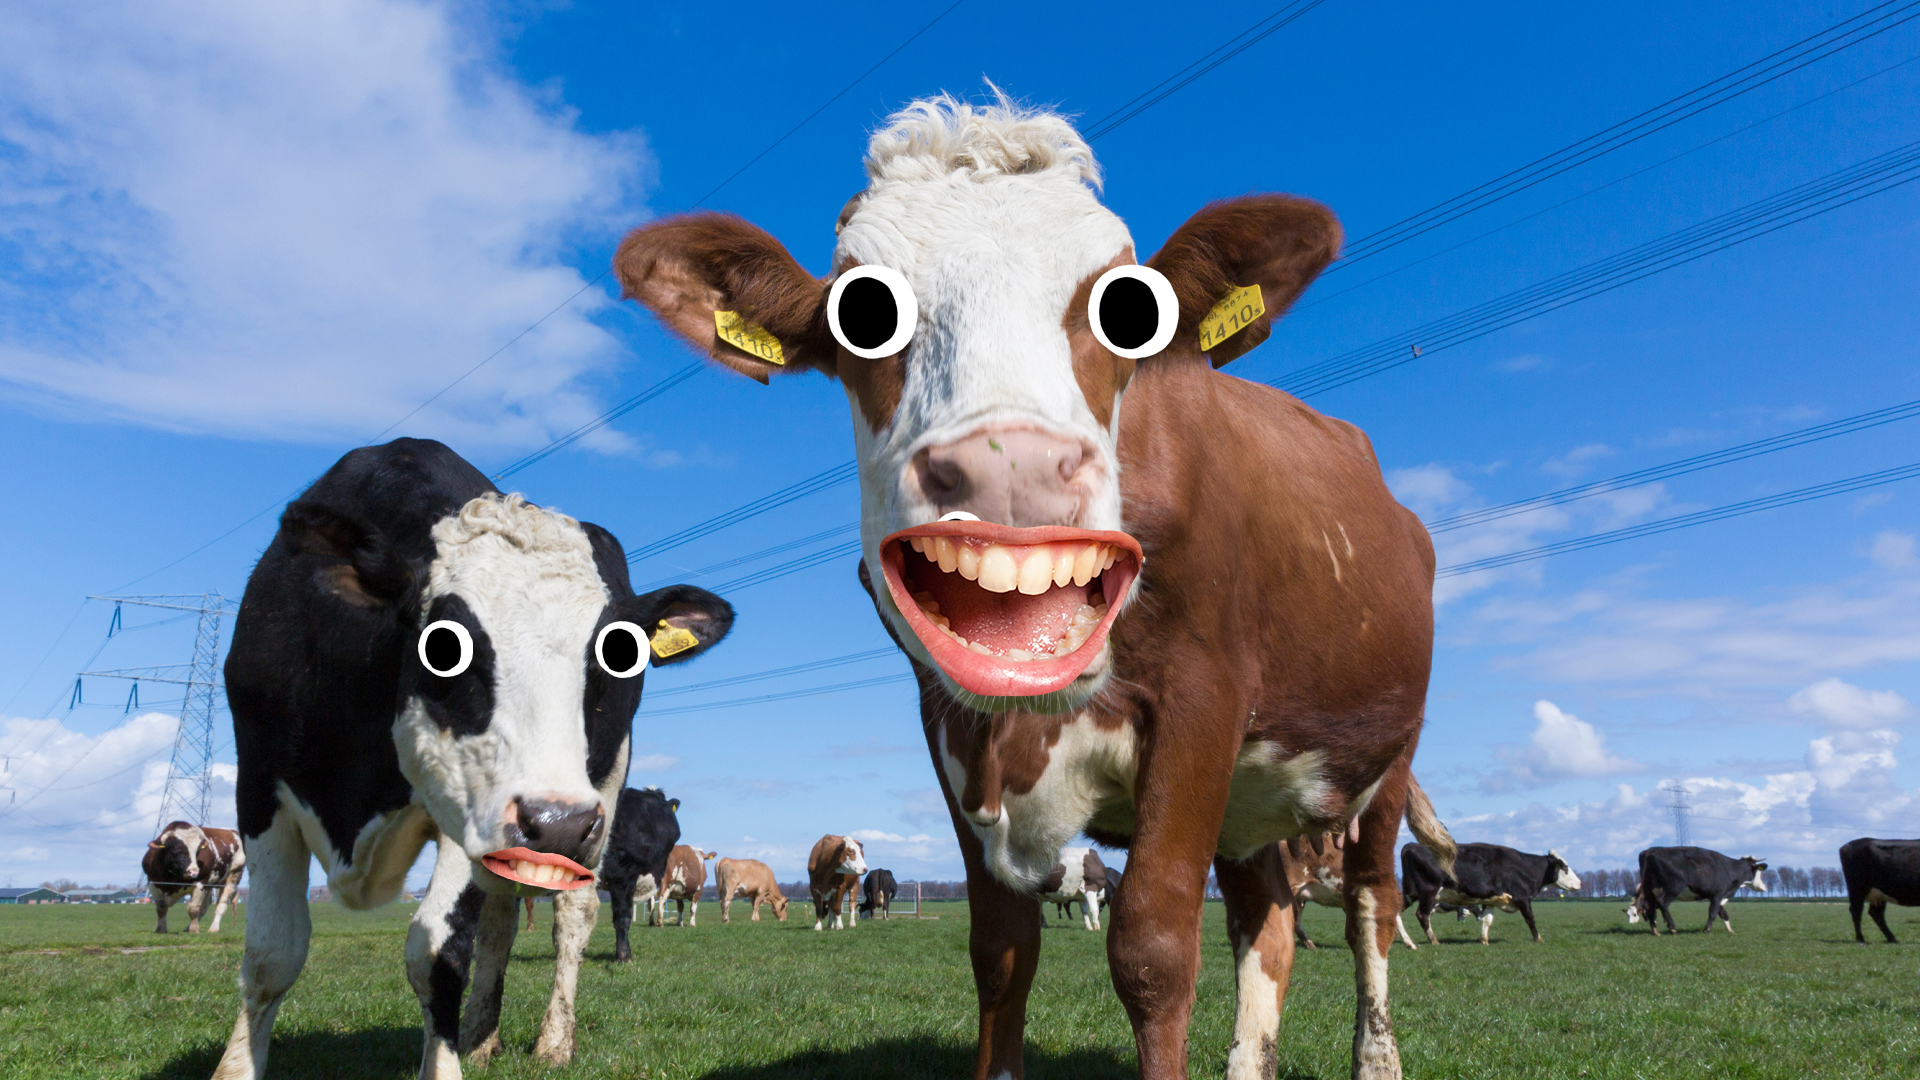 Two laughing cows in a field